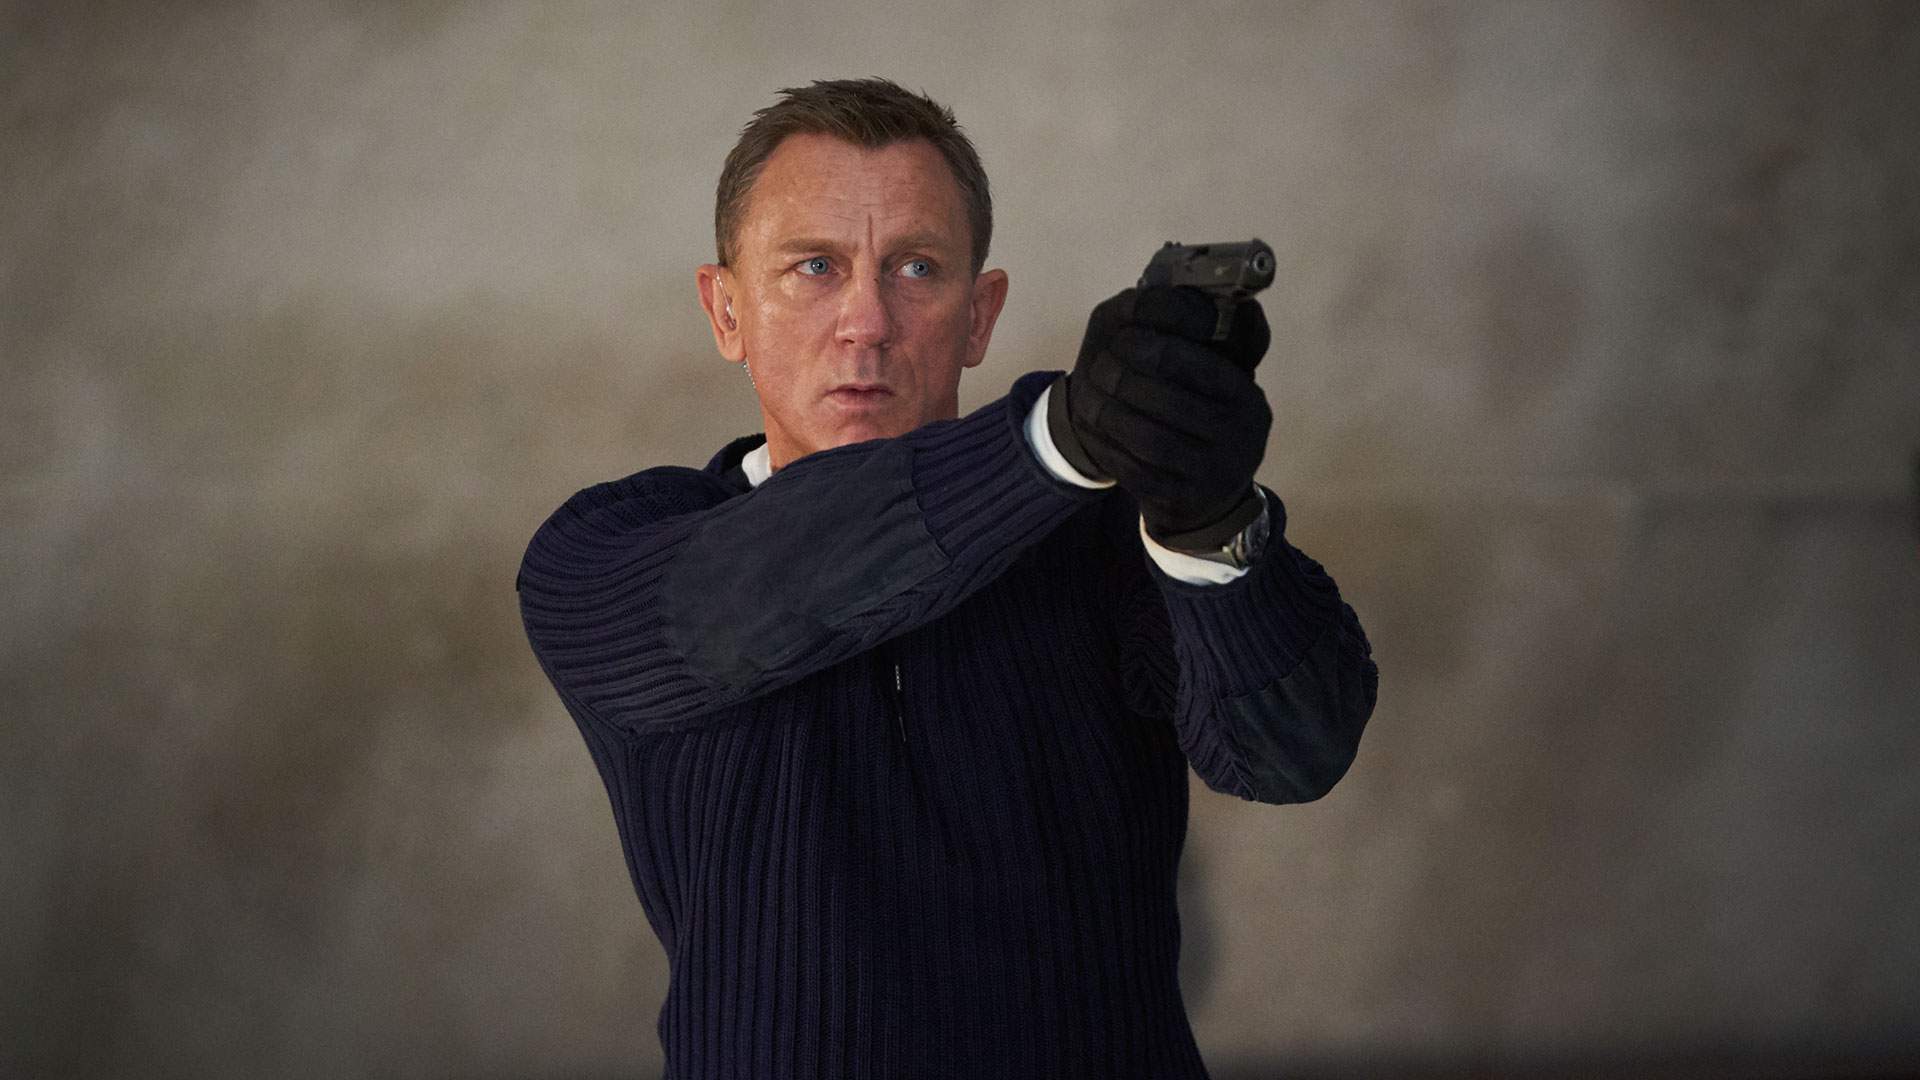 Daniel Craig Steps Into James Bond's Shoes for the Last Time in the 'No Time to Die' Trailer